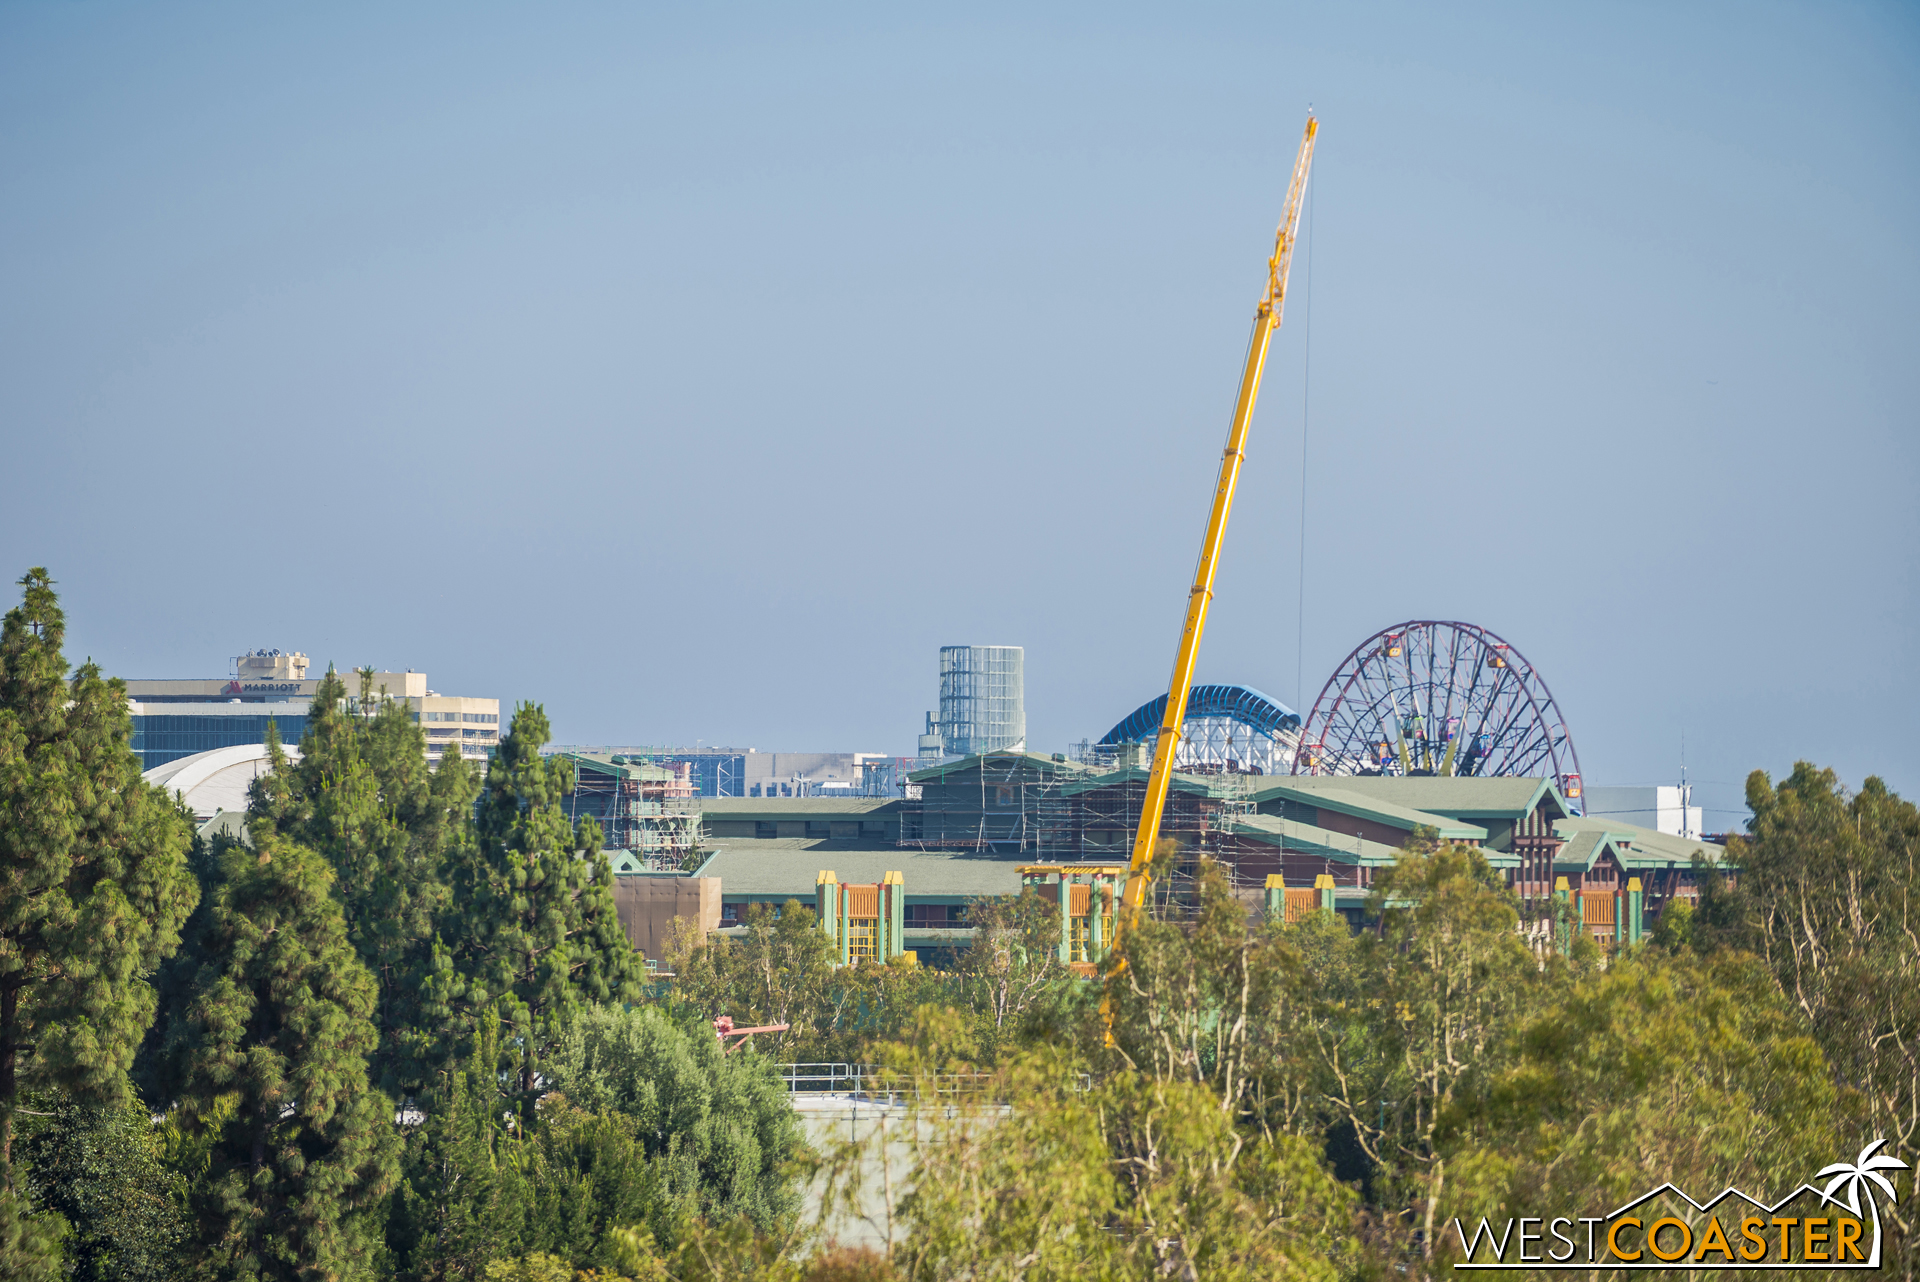  There's also a crane for the Downtown Disney construction of Splittsville too.&nbsp; Though I didn't quite have time to snap some photos, that building has a lot of steel up now! 